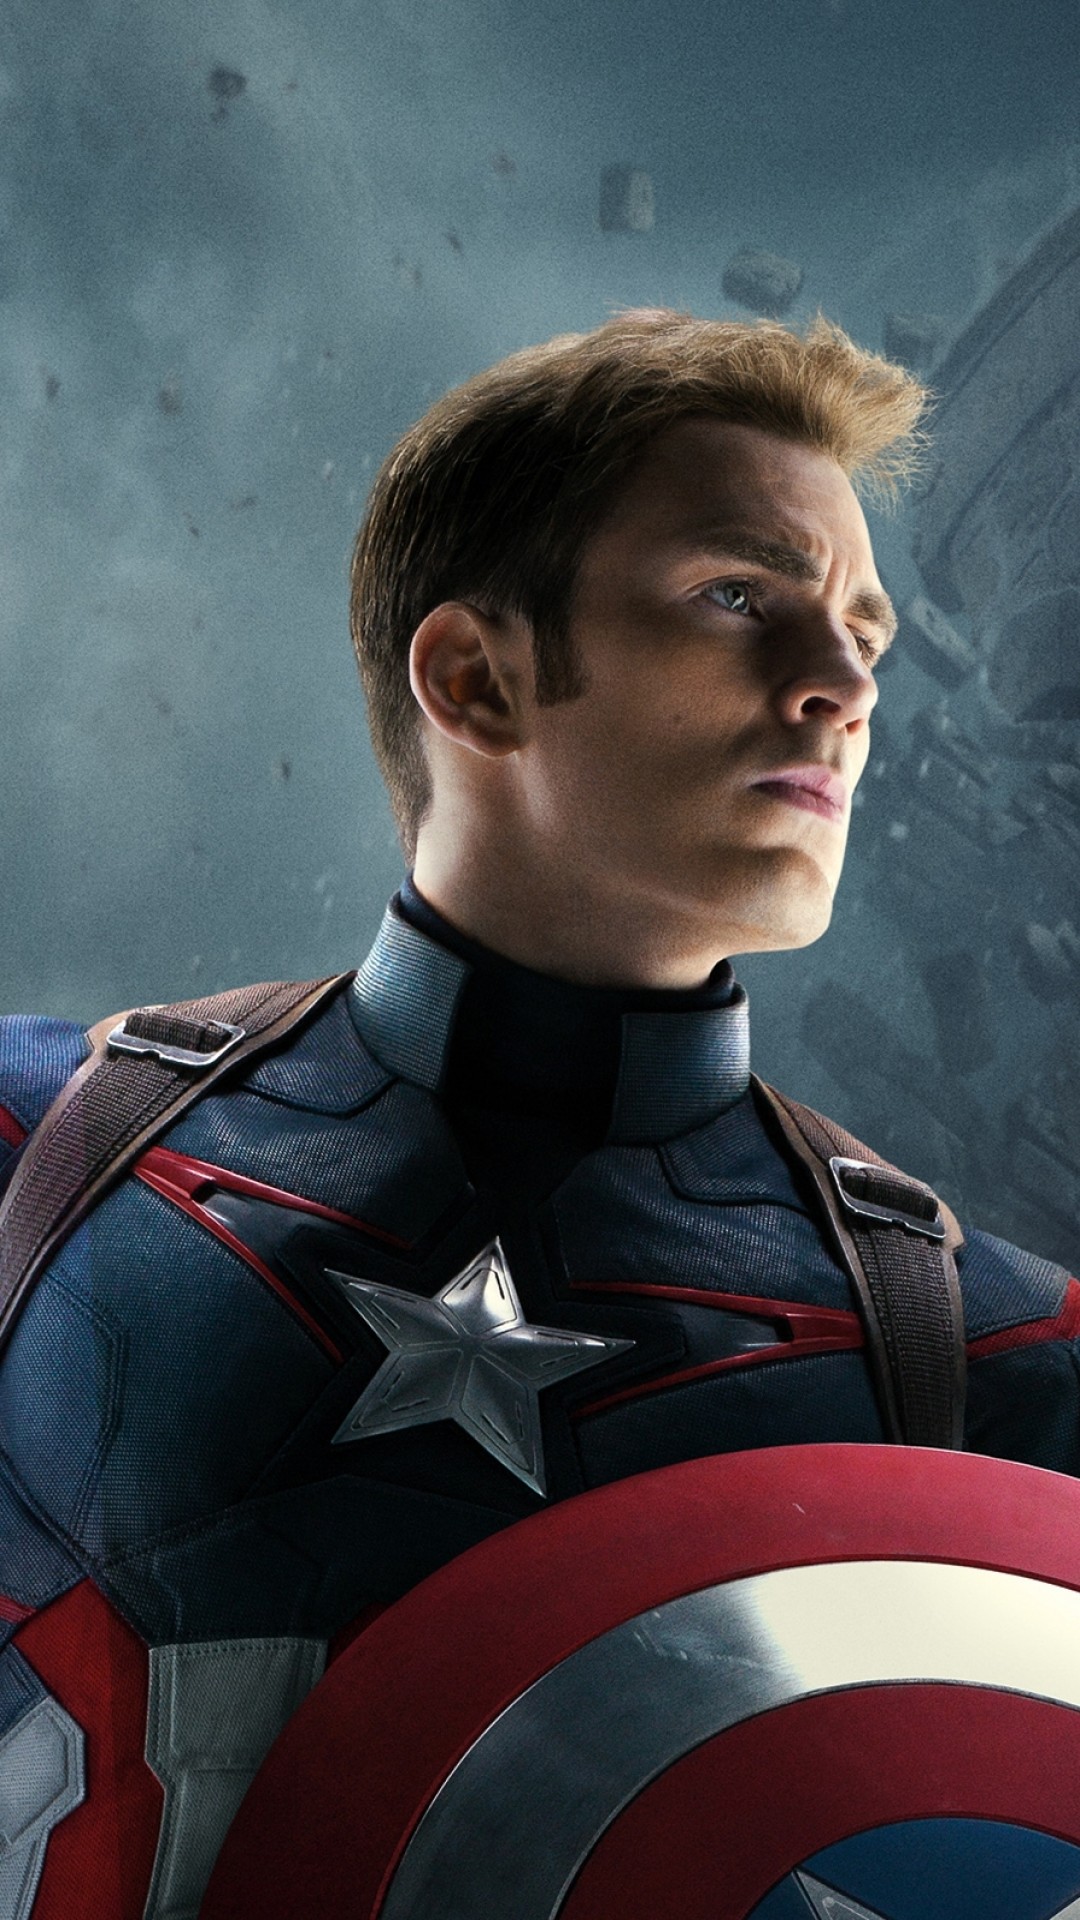 1080x1920 Captain America Avengers Age of Ultron wallpapers (51 Wallpapers)